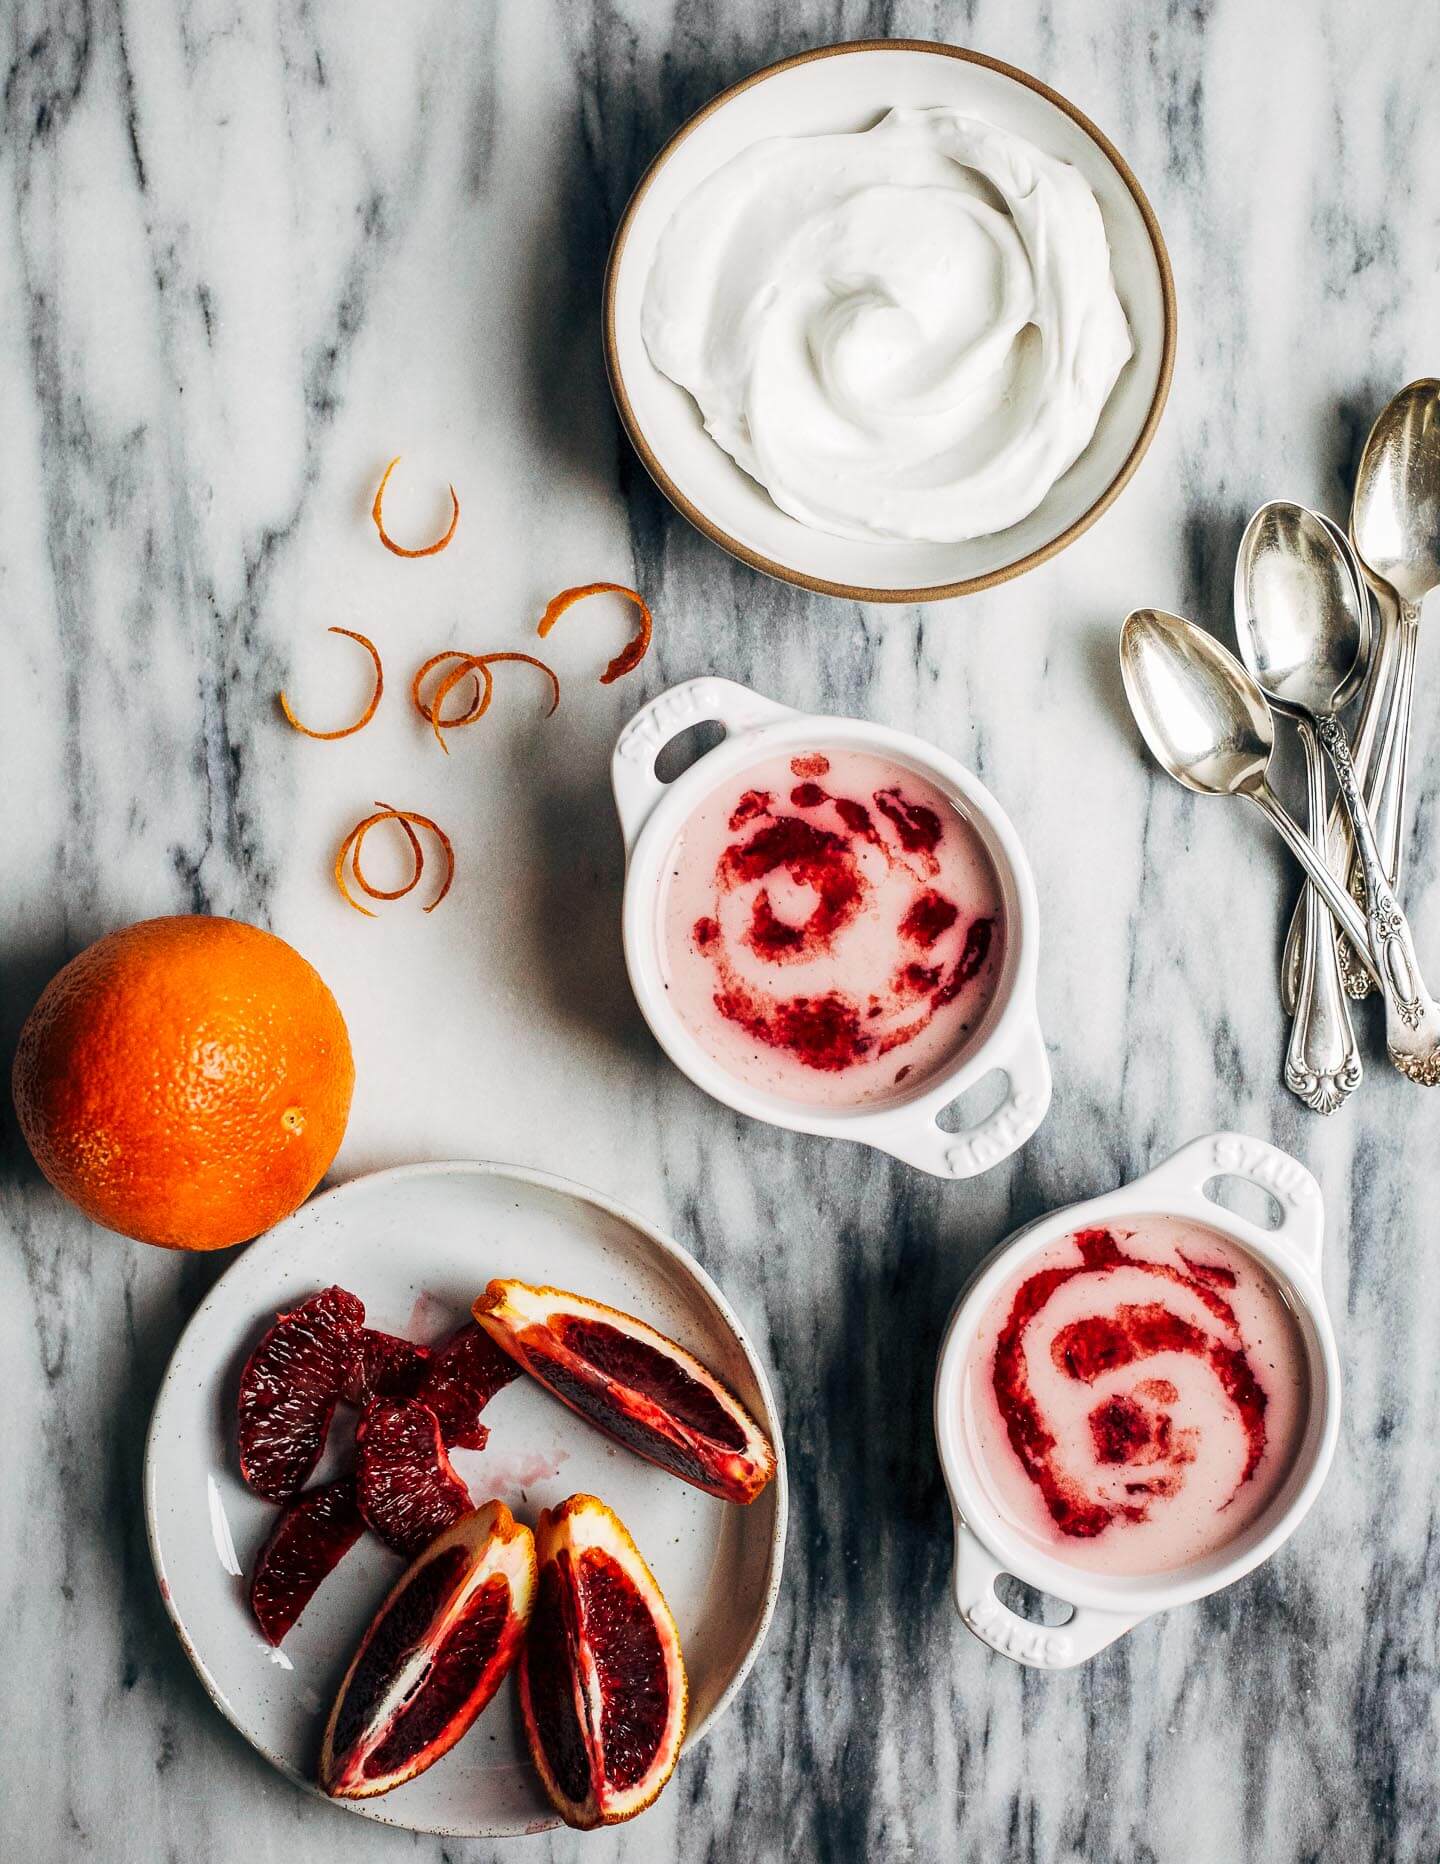 This creamy vegan blood orange panna cotta has a coconut milk base suffused with vanilla bean and clove, and a swirl of ruby-hued blood orange juice on top. Share it with someone you love.